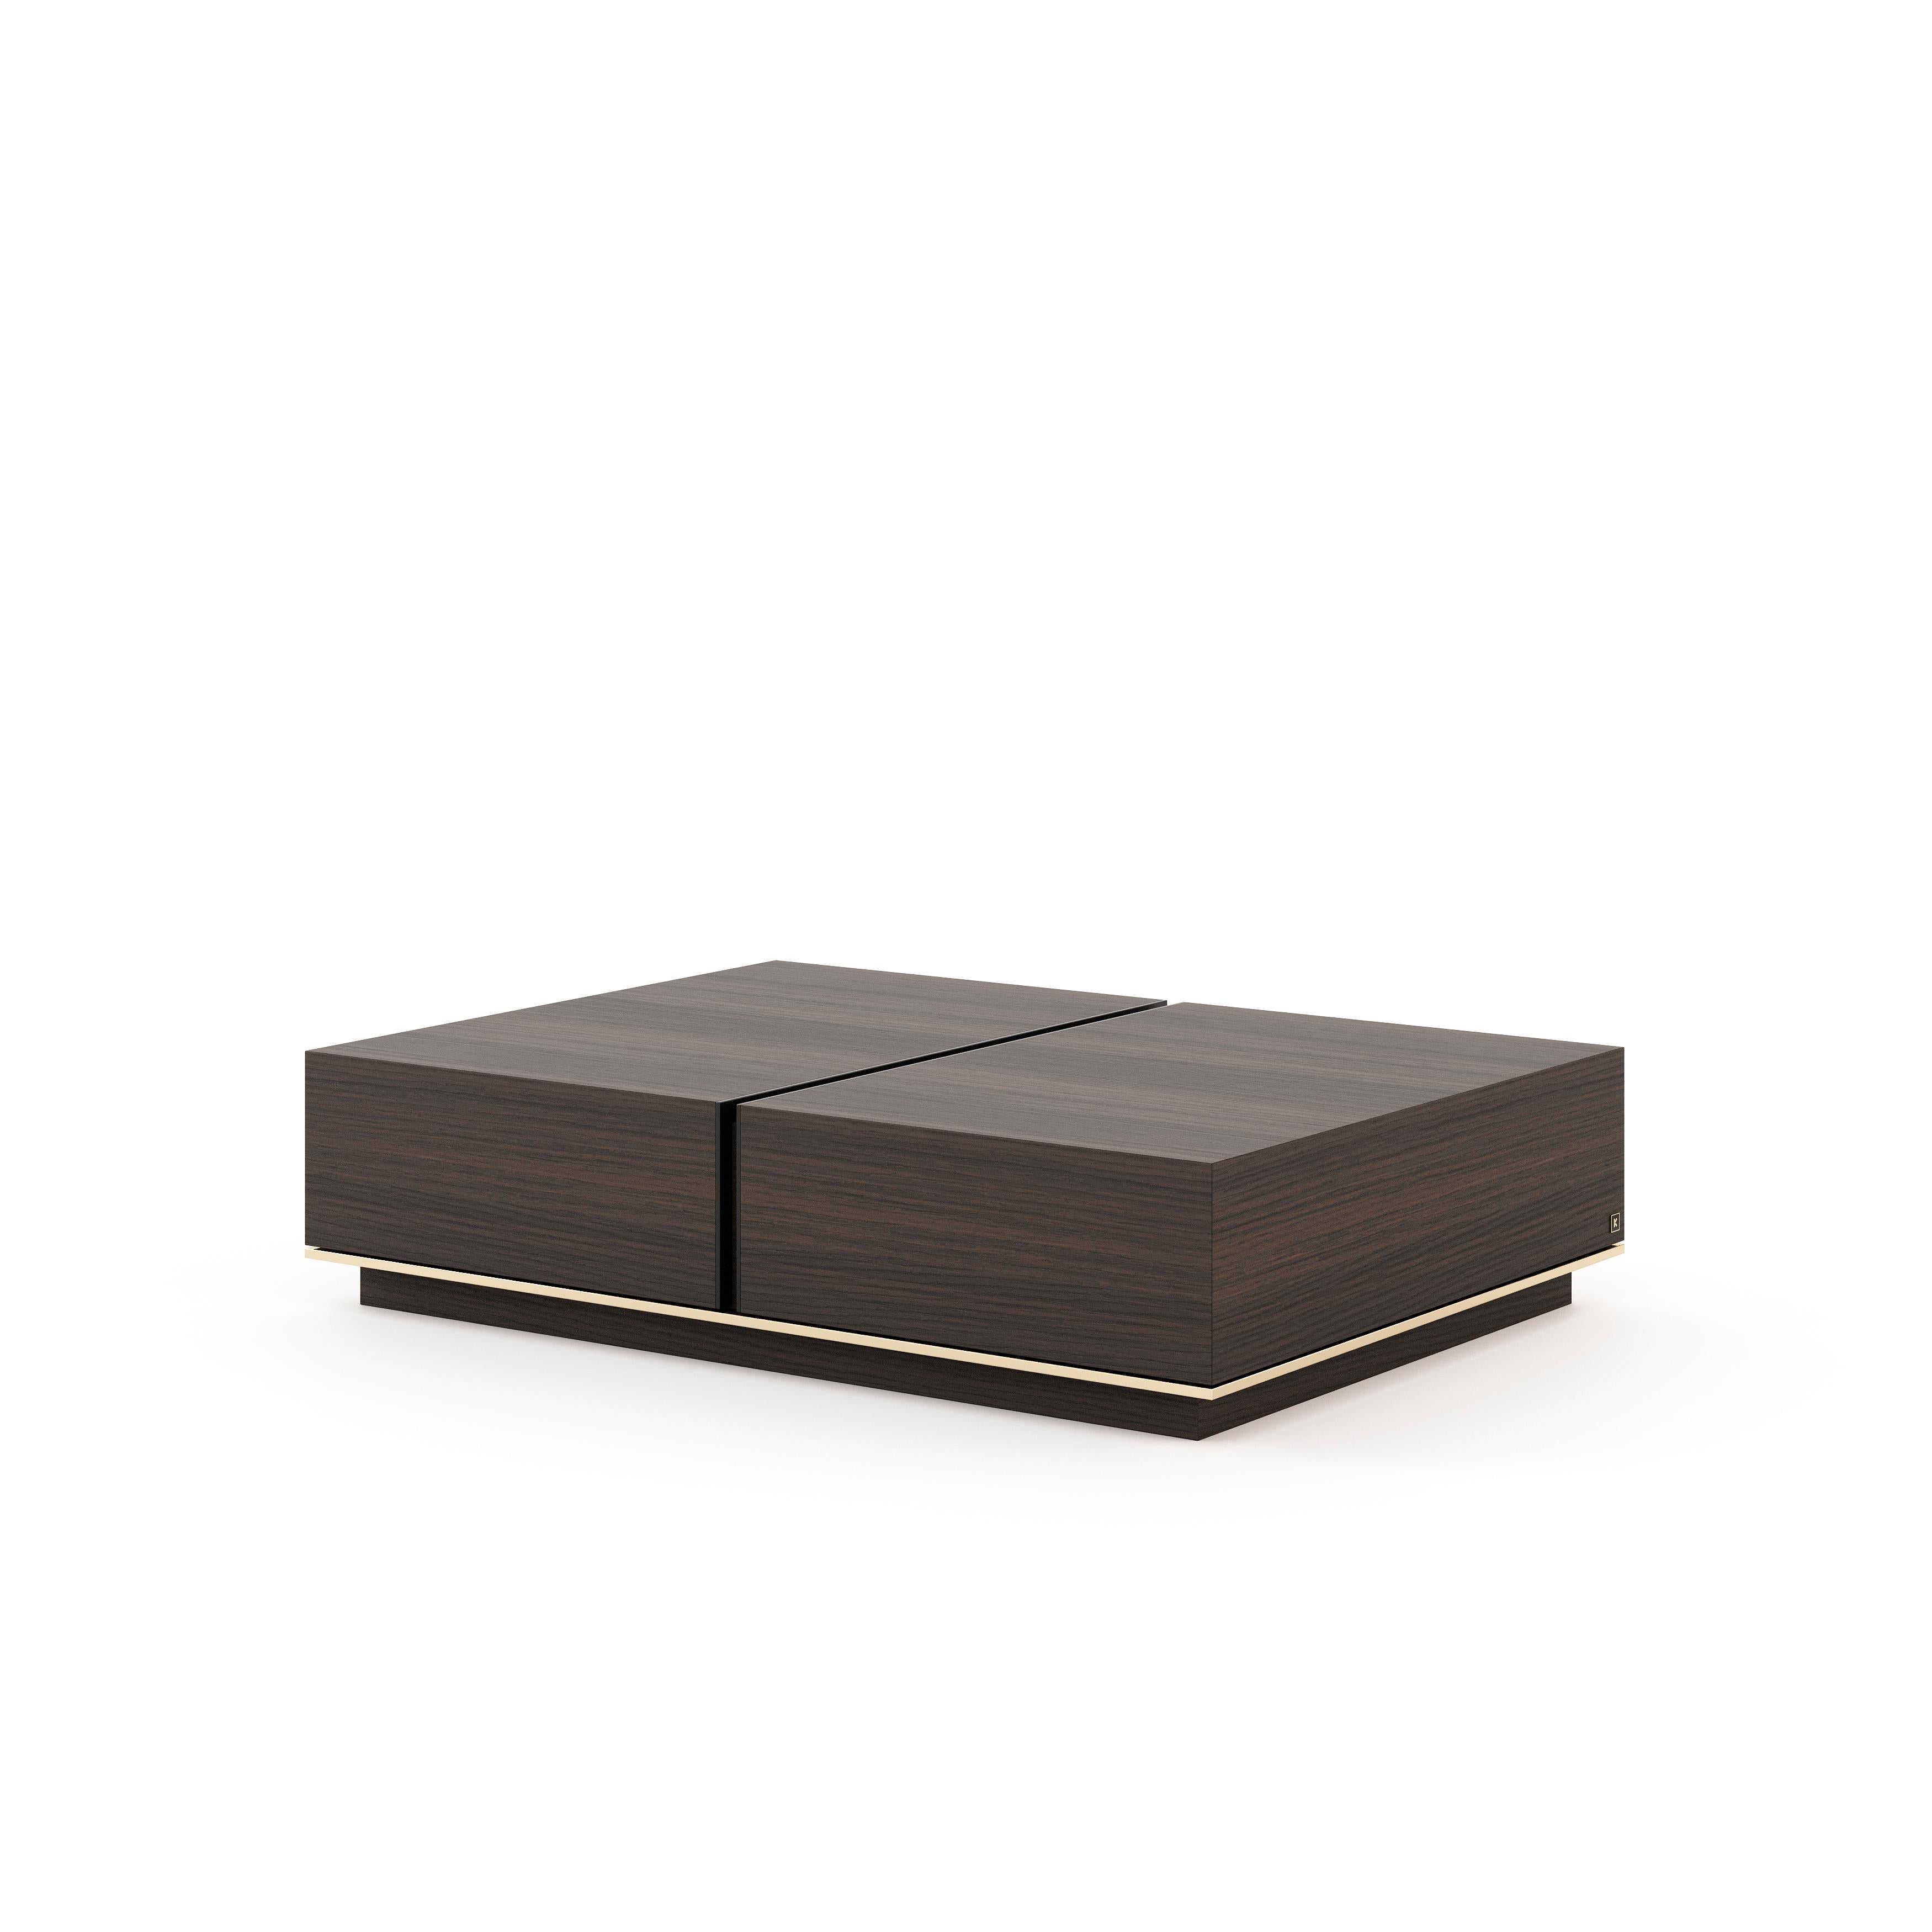 Portuguese Modern coffee table with storage fully customisable by Laskasas For Sale